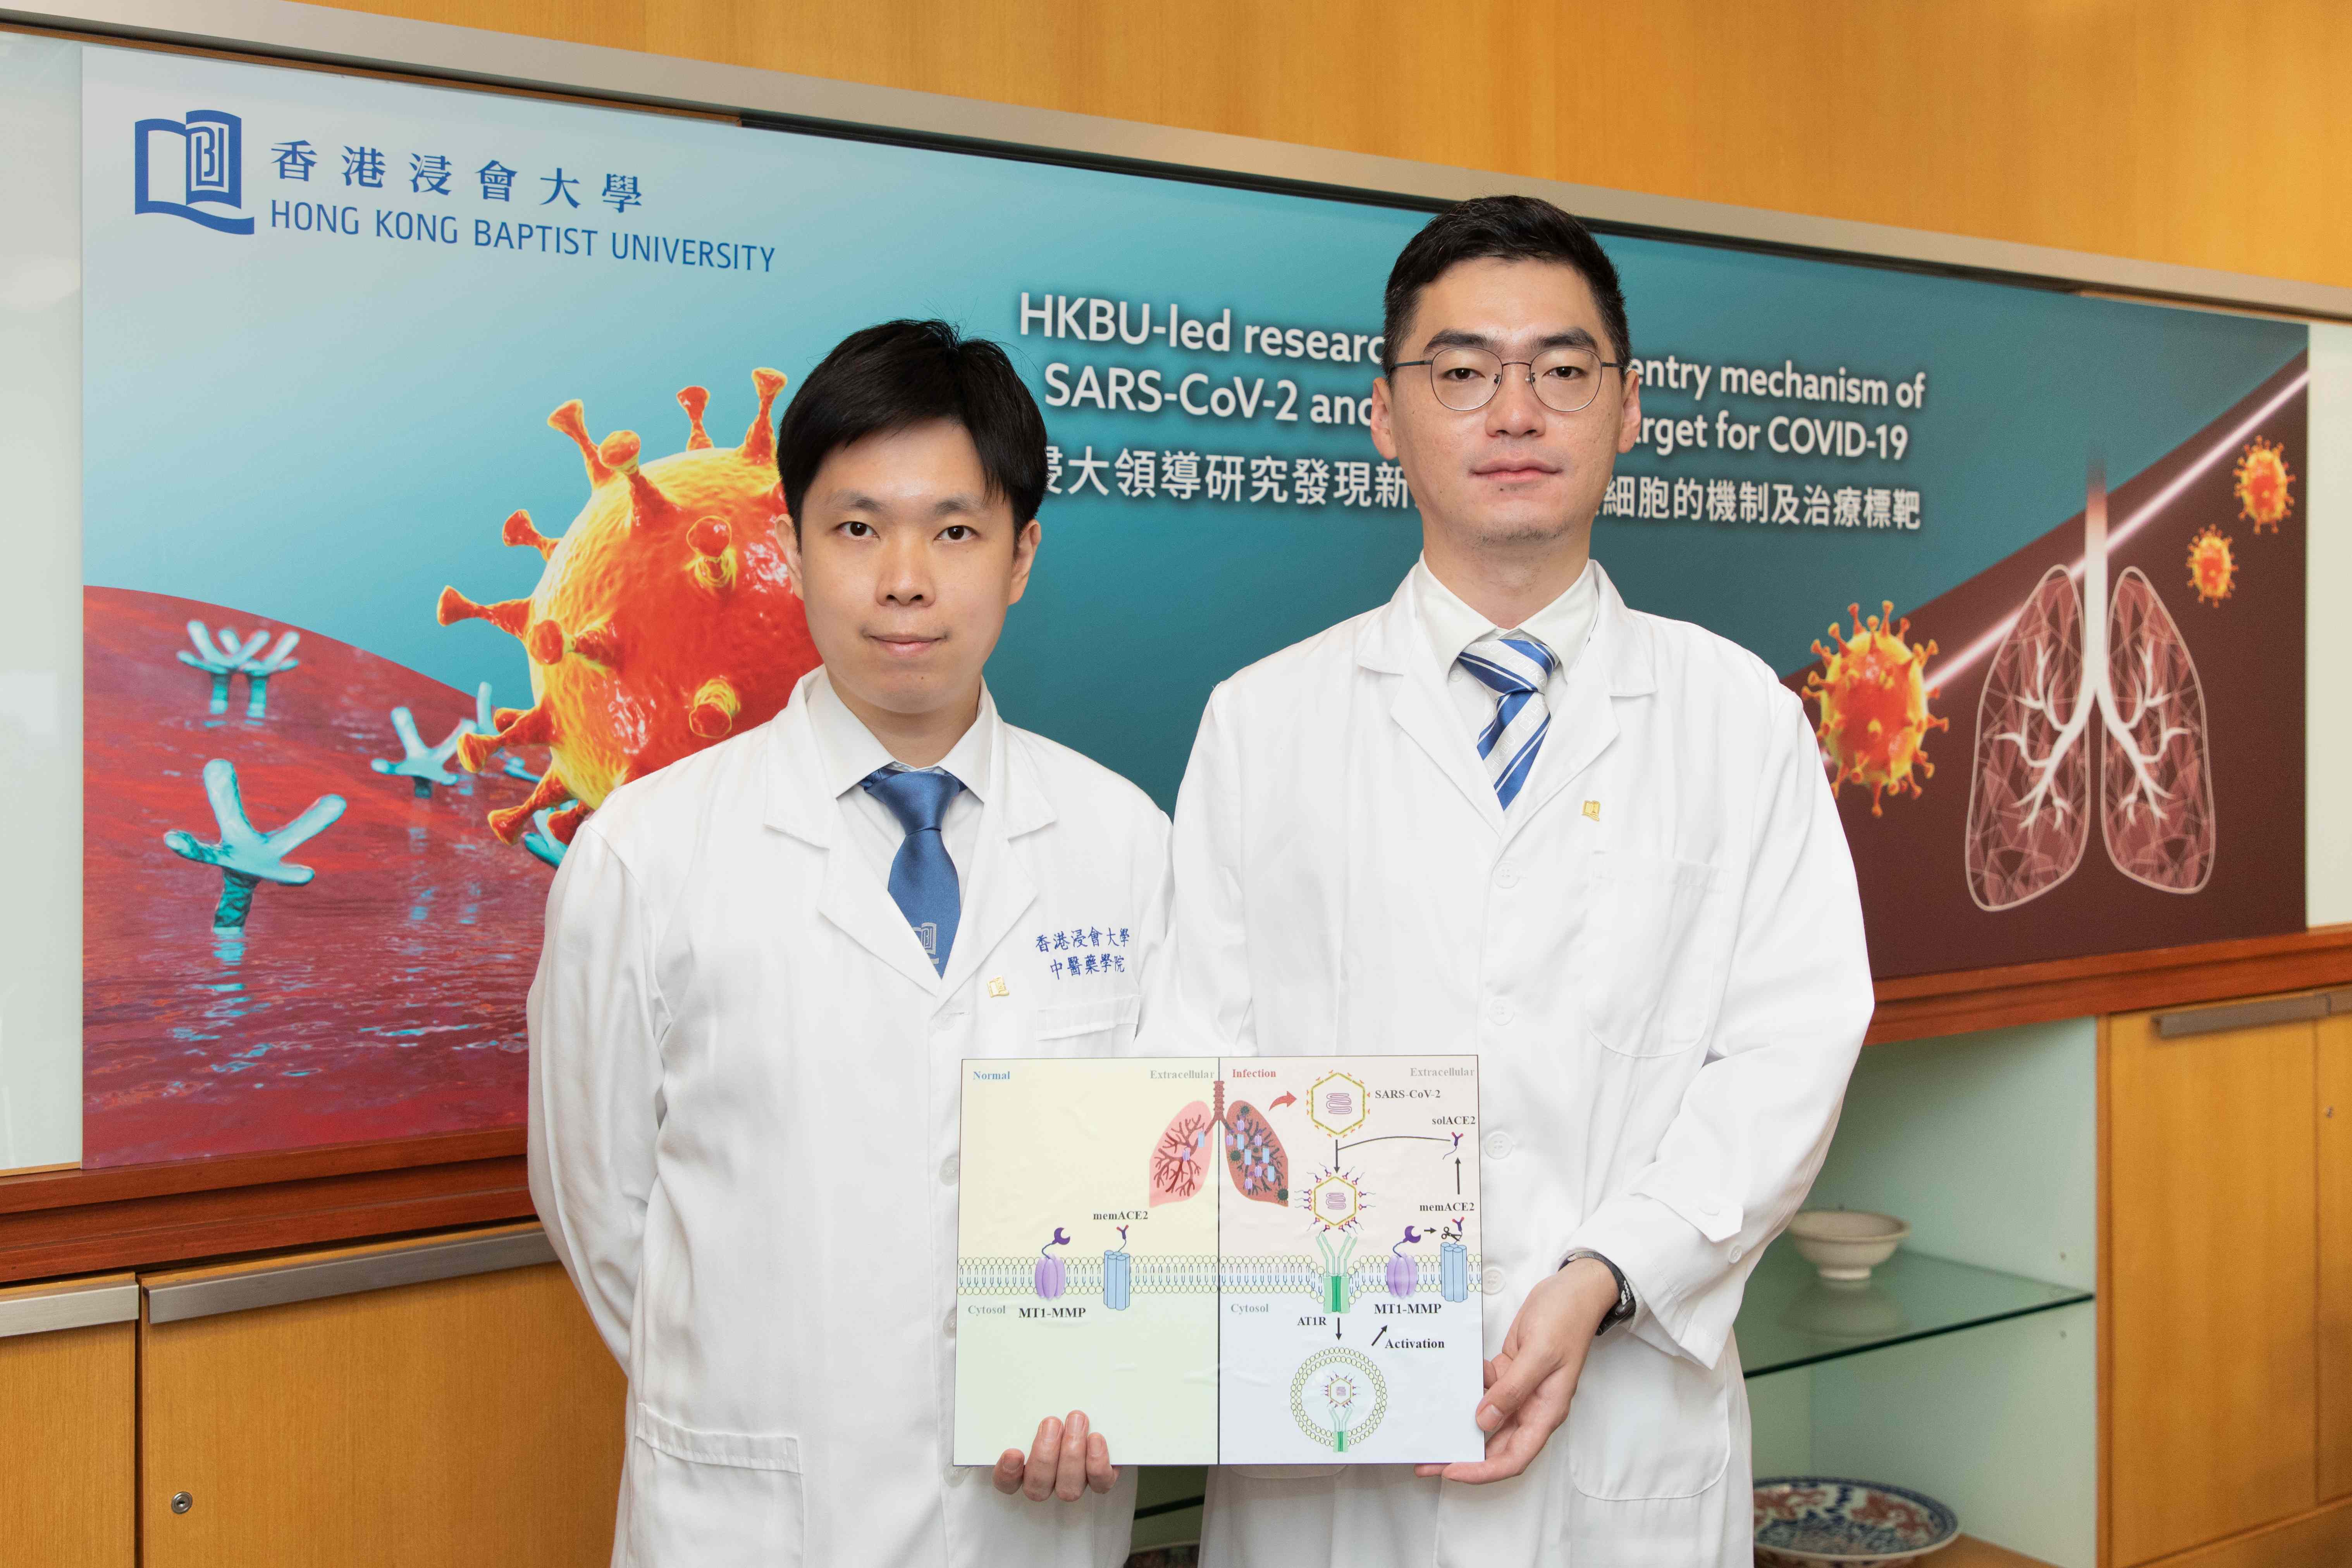 Dr Xavier Wong Hoi-leong, Assistant Professor, and Dr Guo Xuanming, researcher of the Teaching and Research Division of the School of Chinese Medicine, introduce the research findings on the cell entry mechanism of SARS-CoV-2 and therapeutic target for COVID-19.